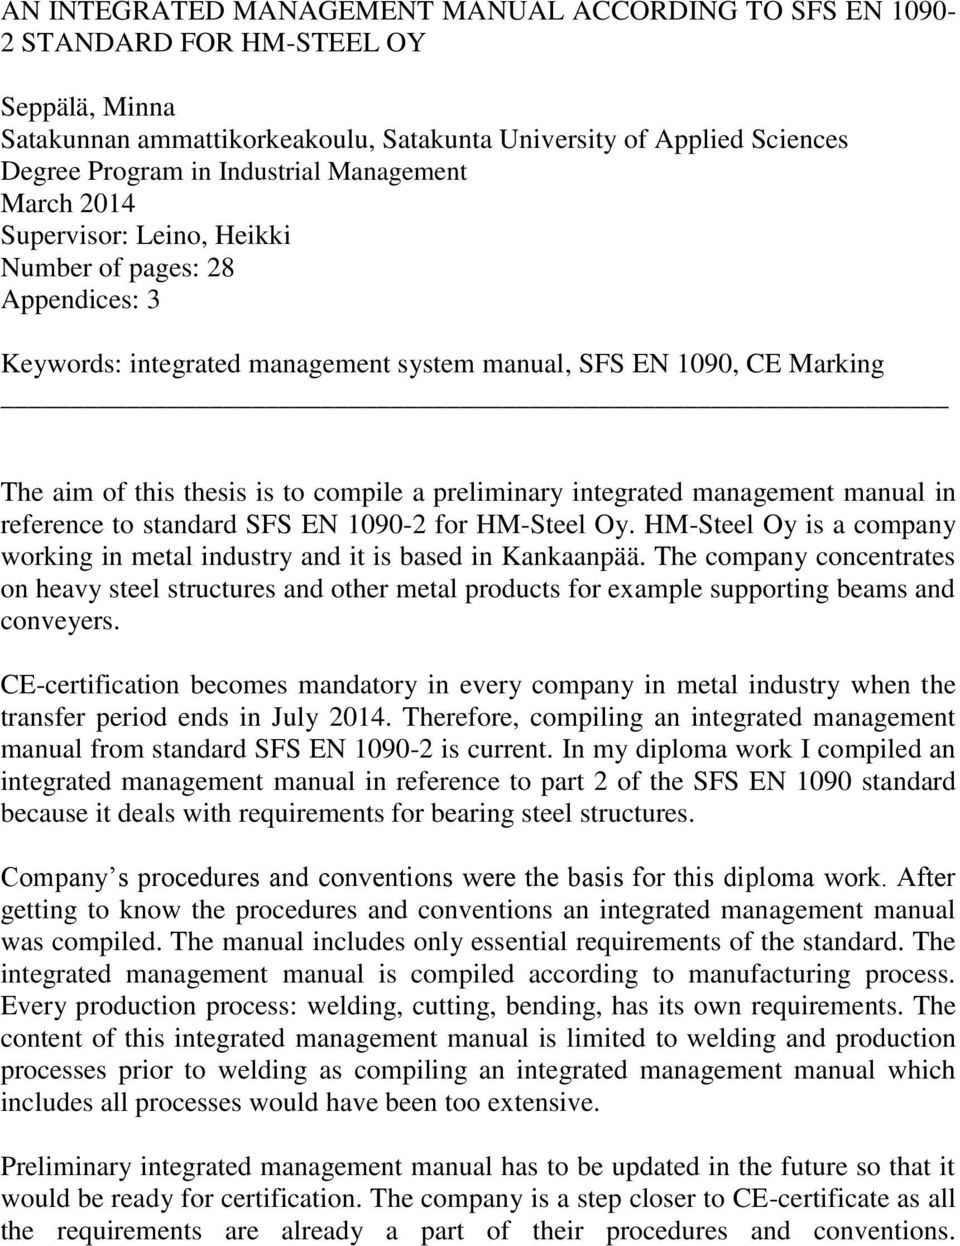 preliminary integrated management manual in reference to standard SFS EN 1090-2 for HM-Steel Oy. HM-Steel Oy is a company working in metal industry and it is based in Kankaanpää.